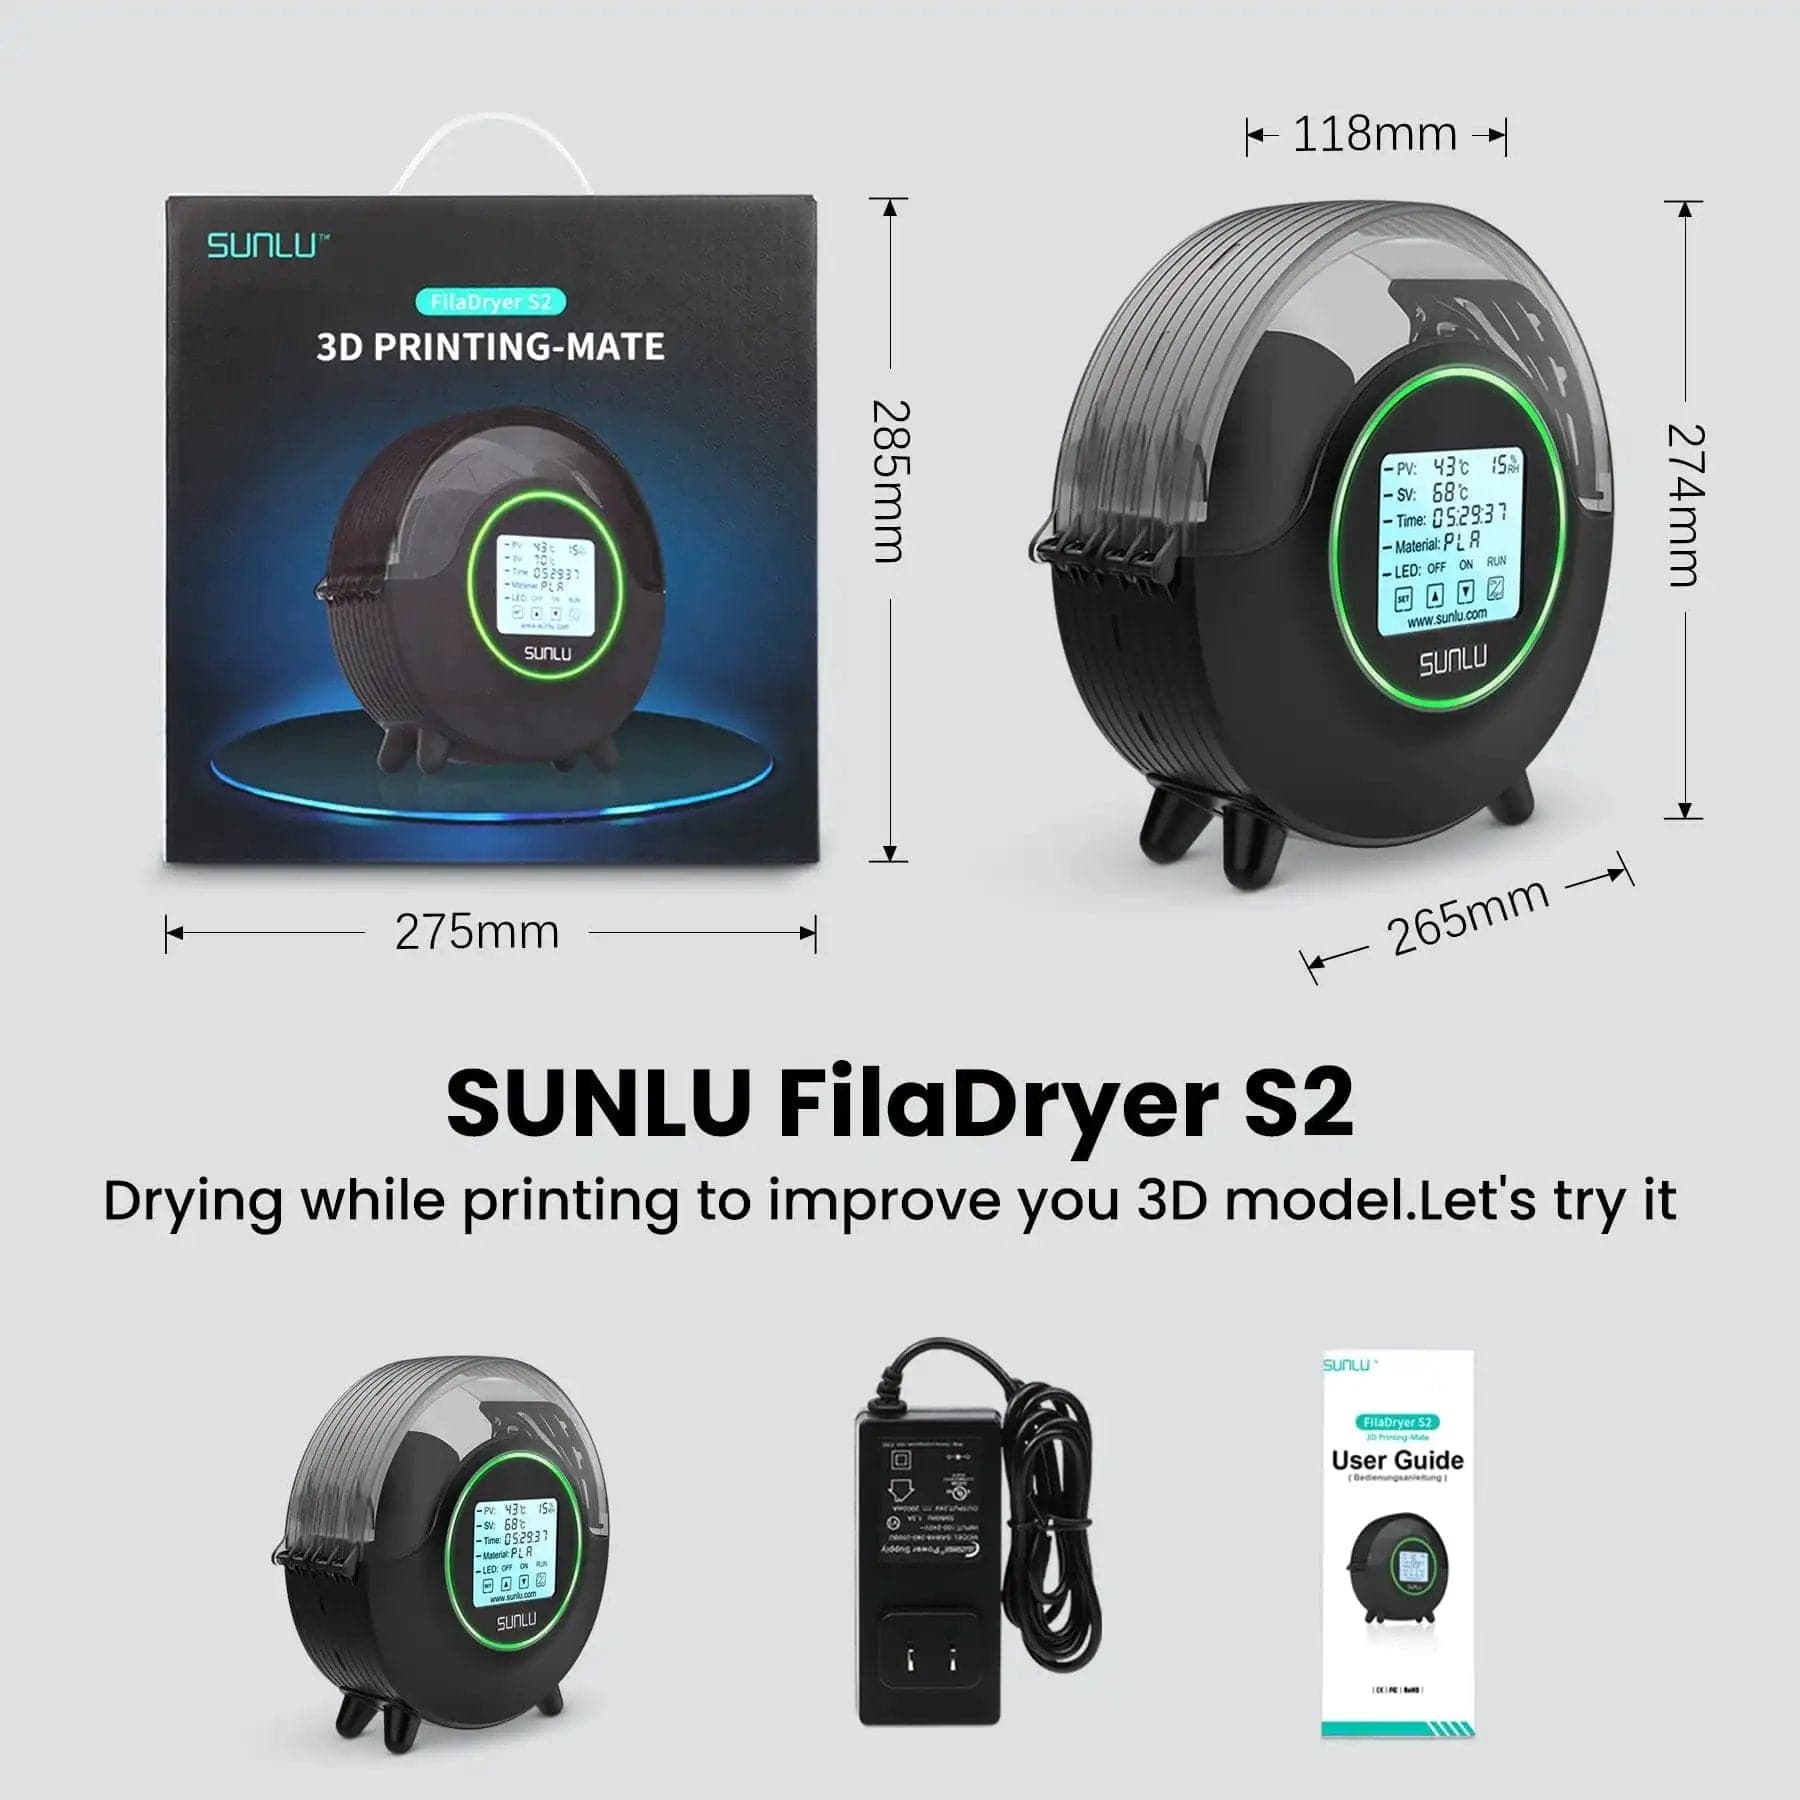  SUNLU Upgraded S2 Filament Dryer Box with Fan, 360° Heating,  Real-time Humidity Display, 3D Printer Filament Dehydrator for PLA, TPU,  PETG, ABS, ASA, 1.75 2.85 3.00mm, 1 Kg Spool : Industrial & Scientific